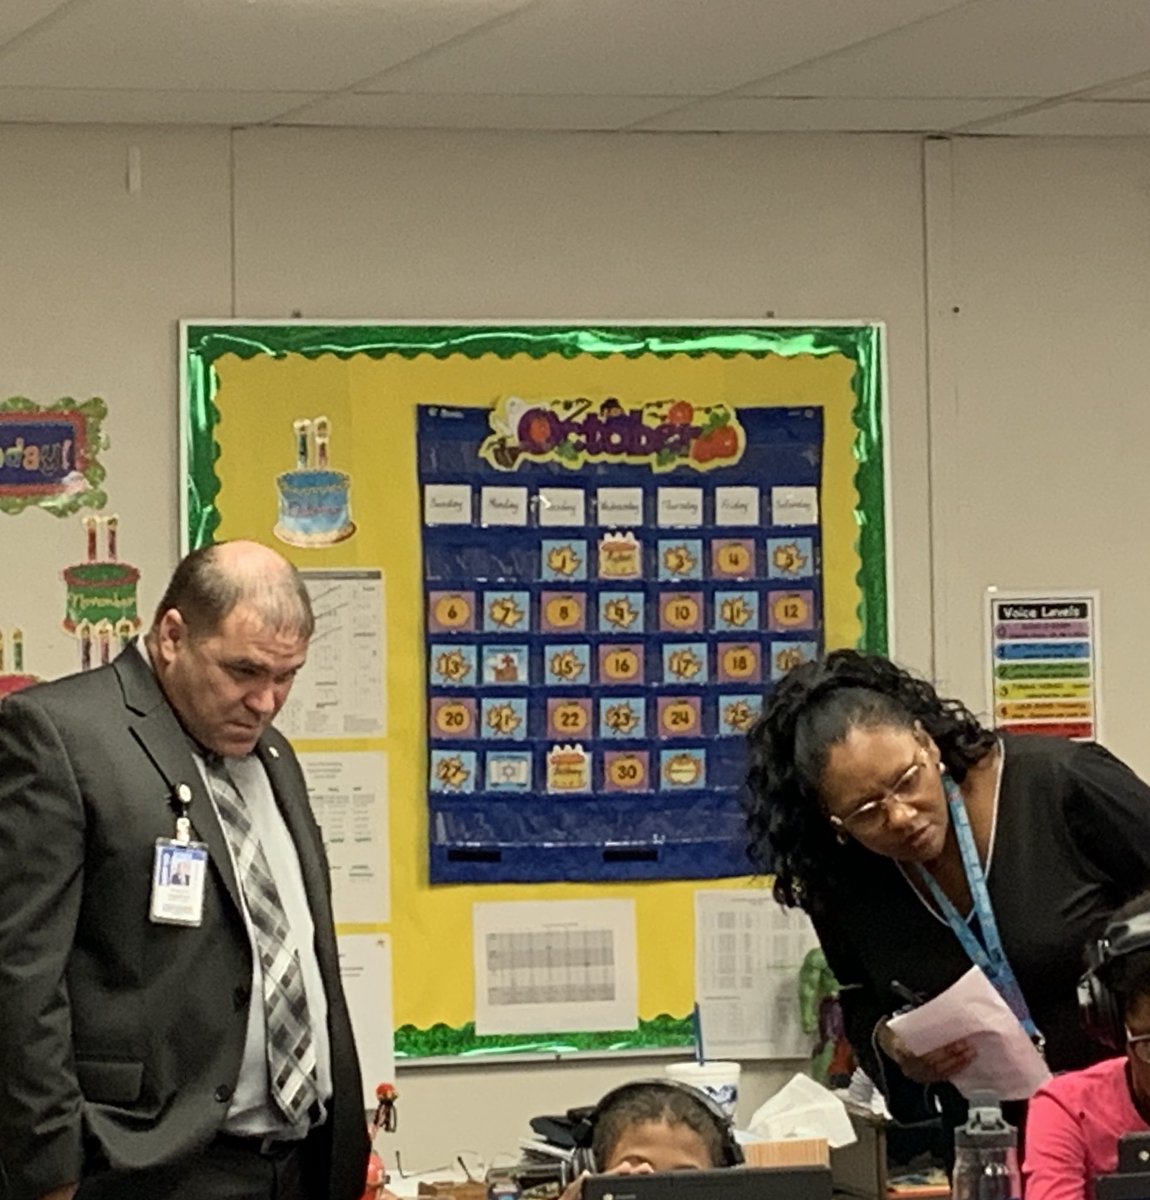 We have been so busy working hard @franz_firebirds! Thank you to Dr. Gregorski for coming by to visit and see all the great things we’re doing! @katyisd @KDMSylvan #DrGVisitsMe #RootedInExcellence